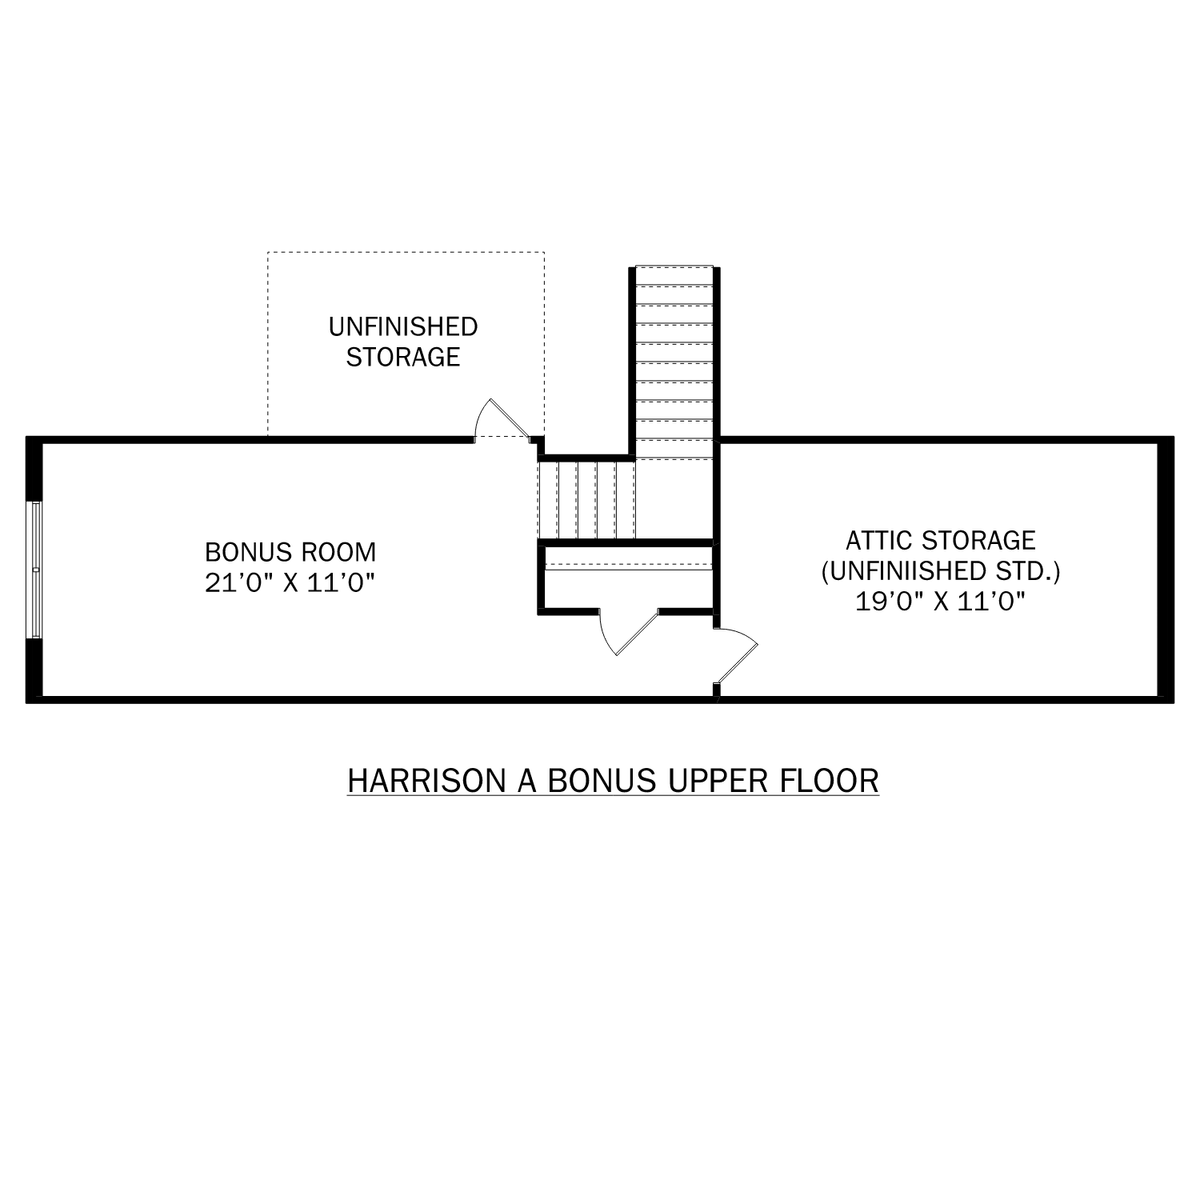 2 - The Harrison with Bonus buildable floor plan layout in Davidson Homes' Kendall Downs community.